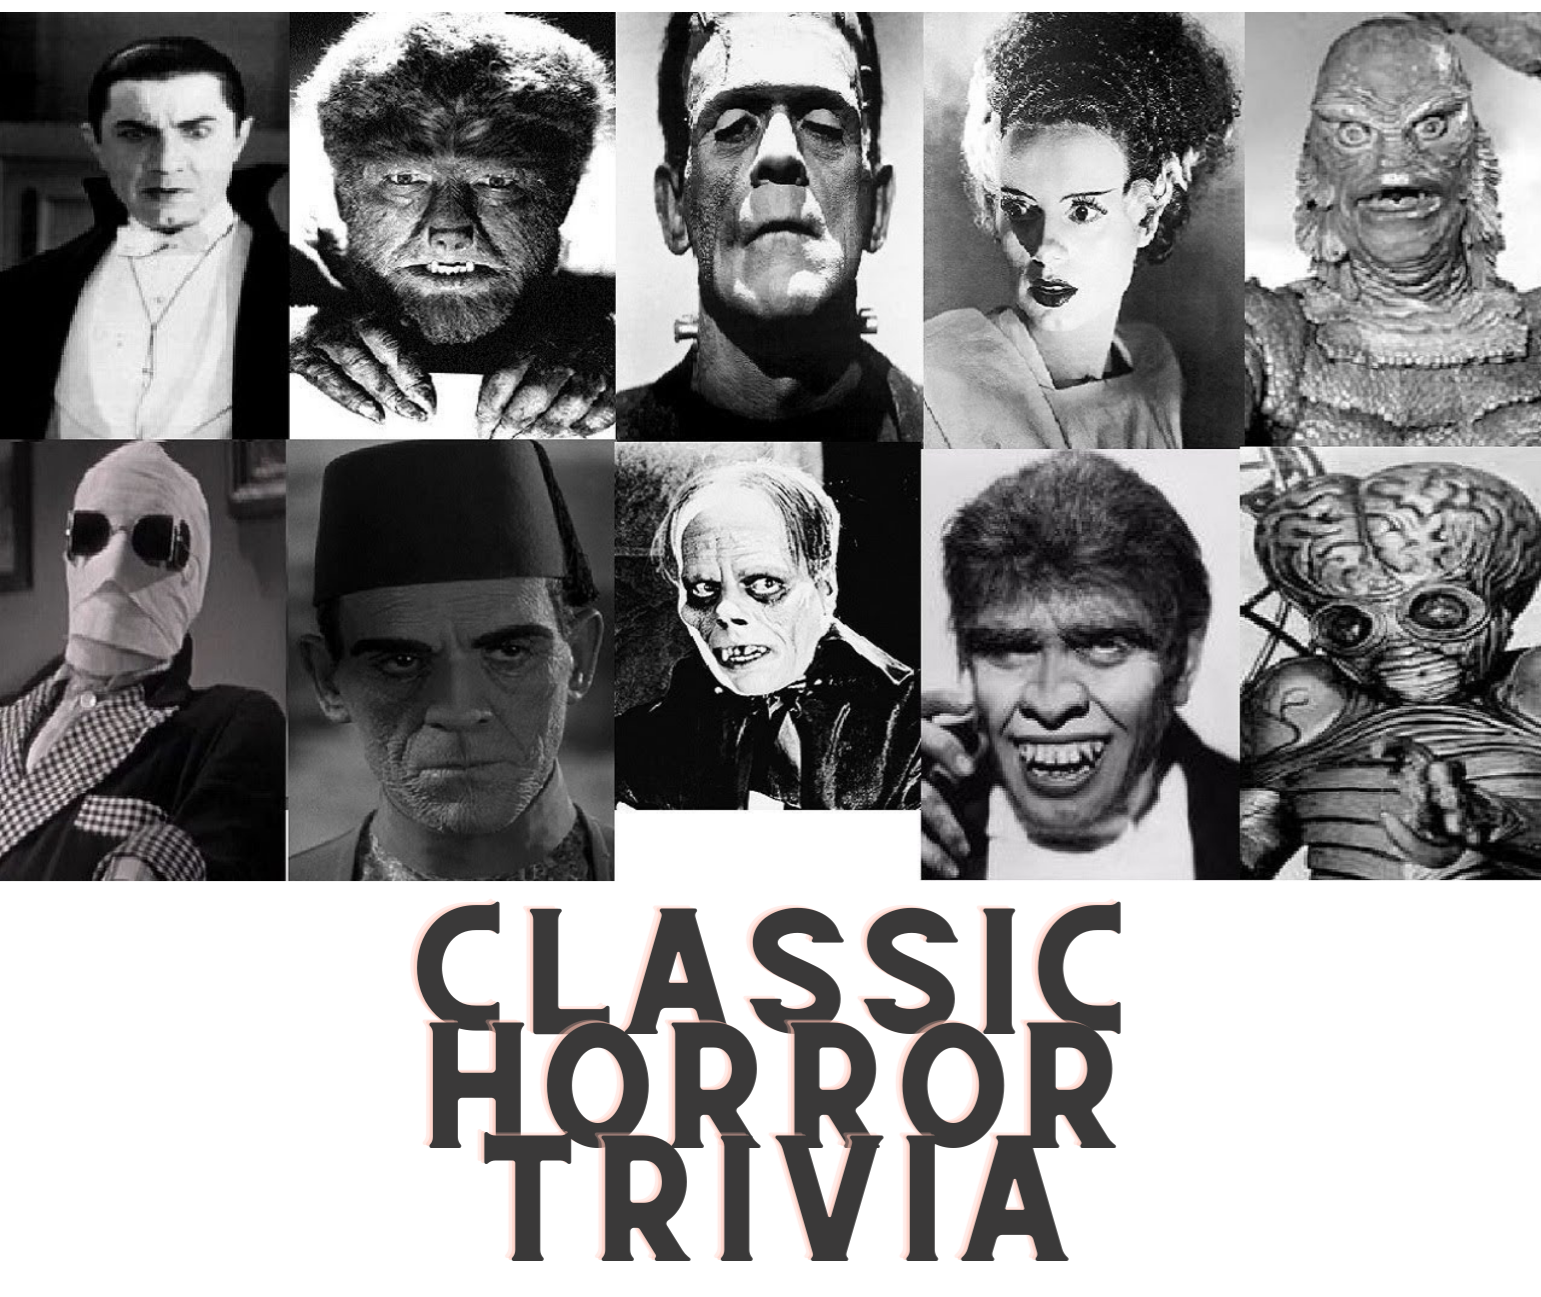 Classic Horror Trivia poster with multiple classic horror film stars in black and white background. 